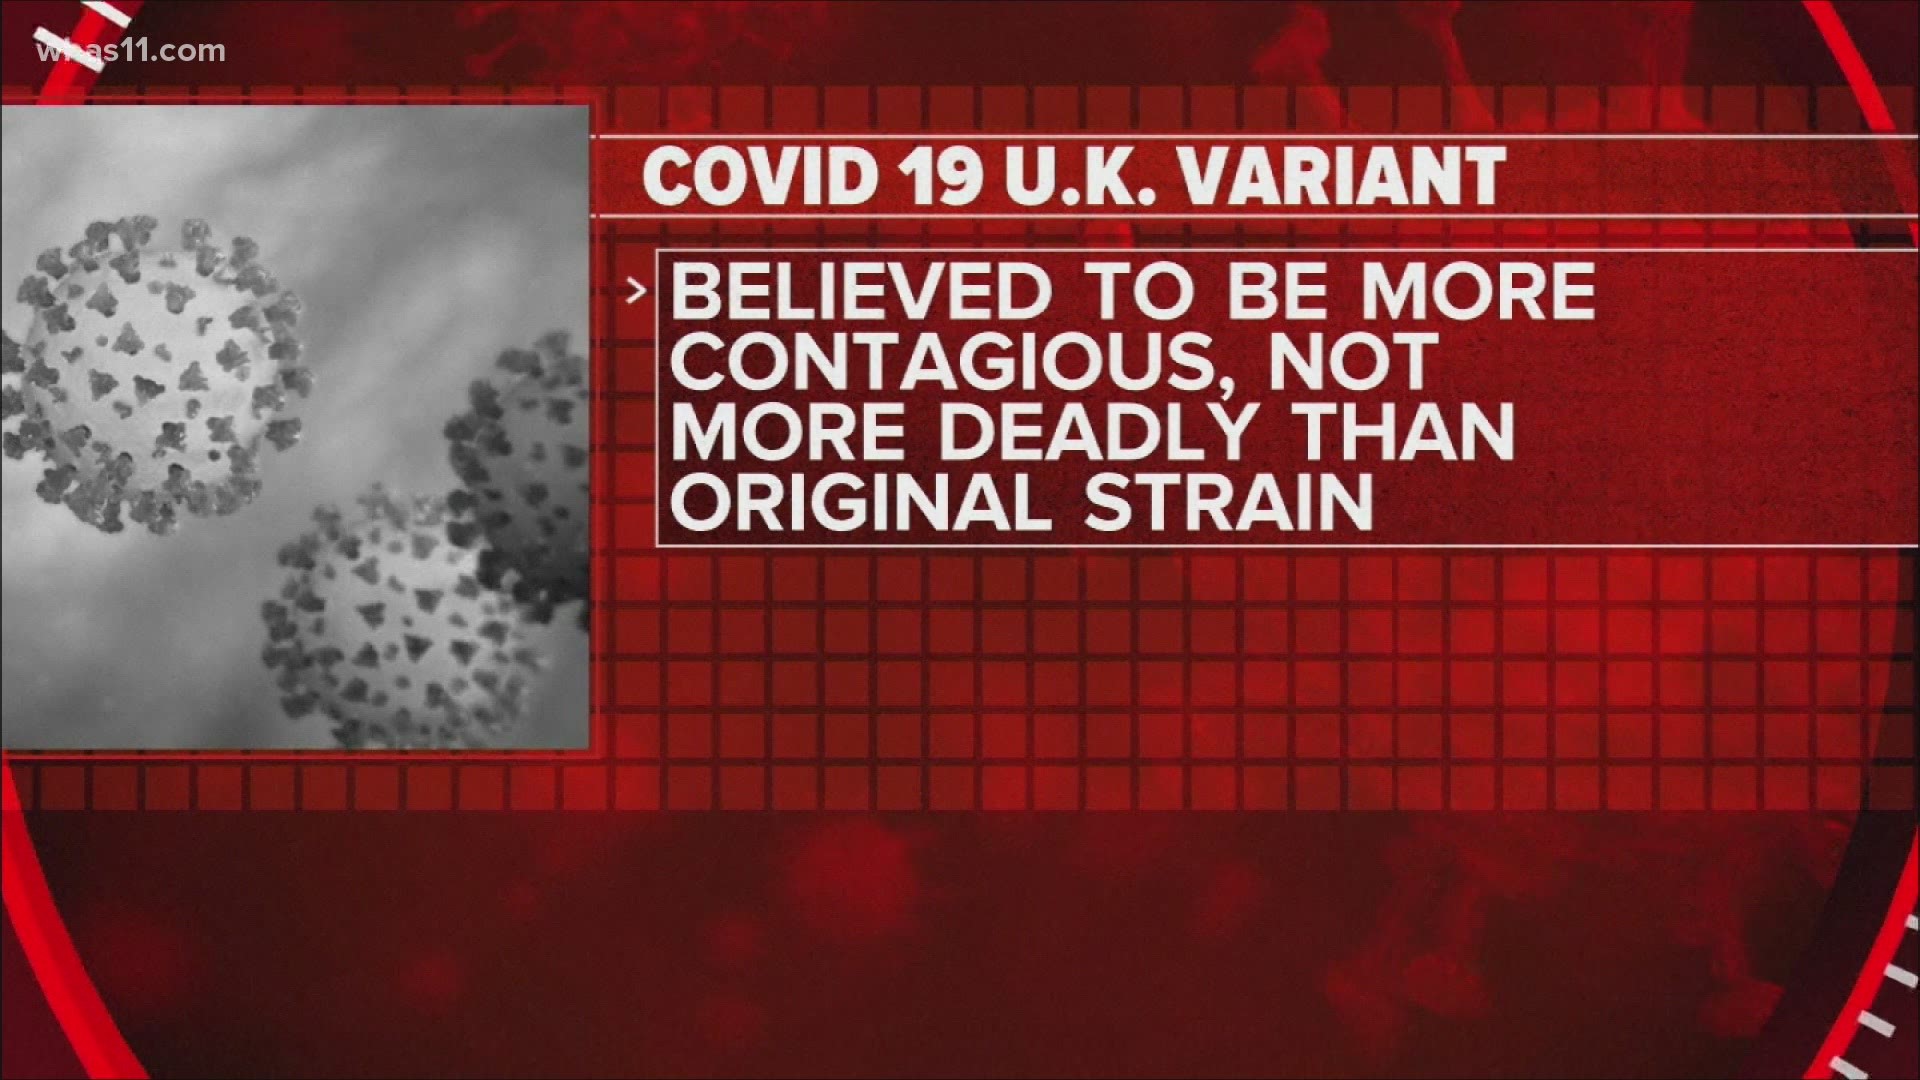 New York Governor Andrew Cuomo announced a case of the new, highly contagious COVID variant has been identified in Saratoga, New York.